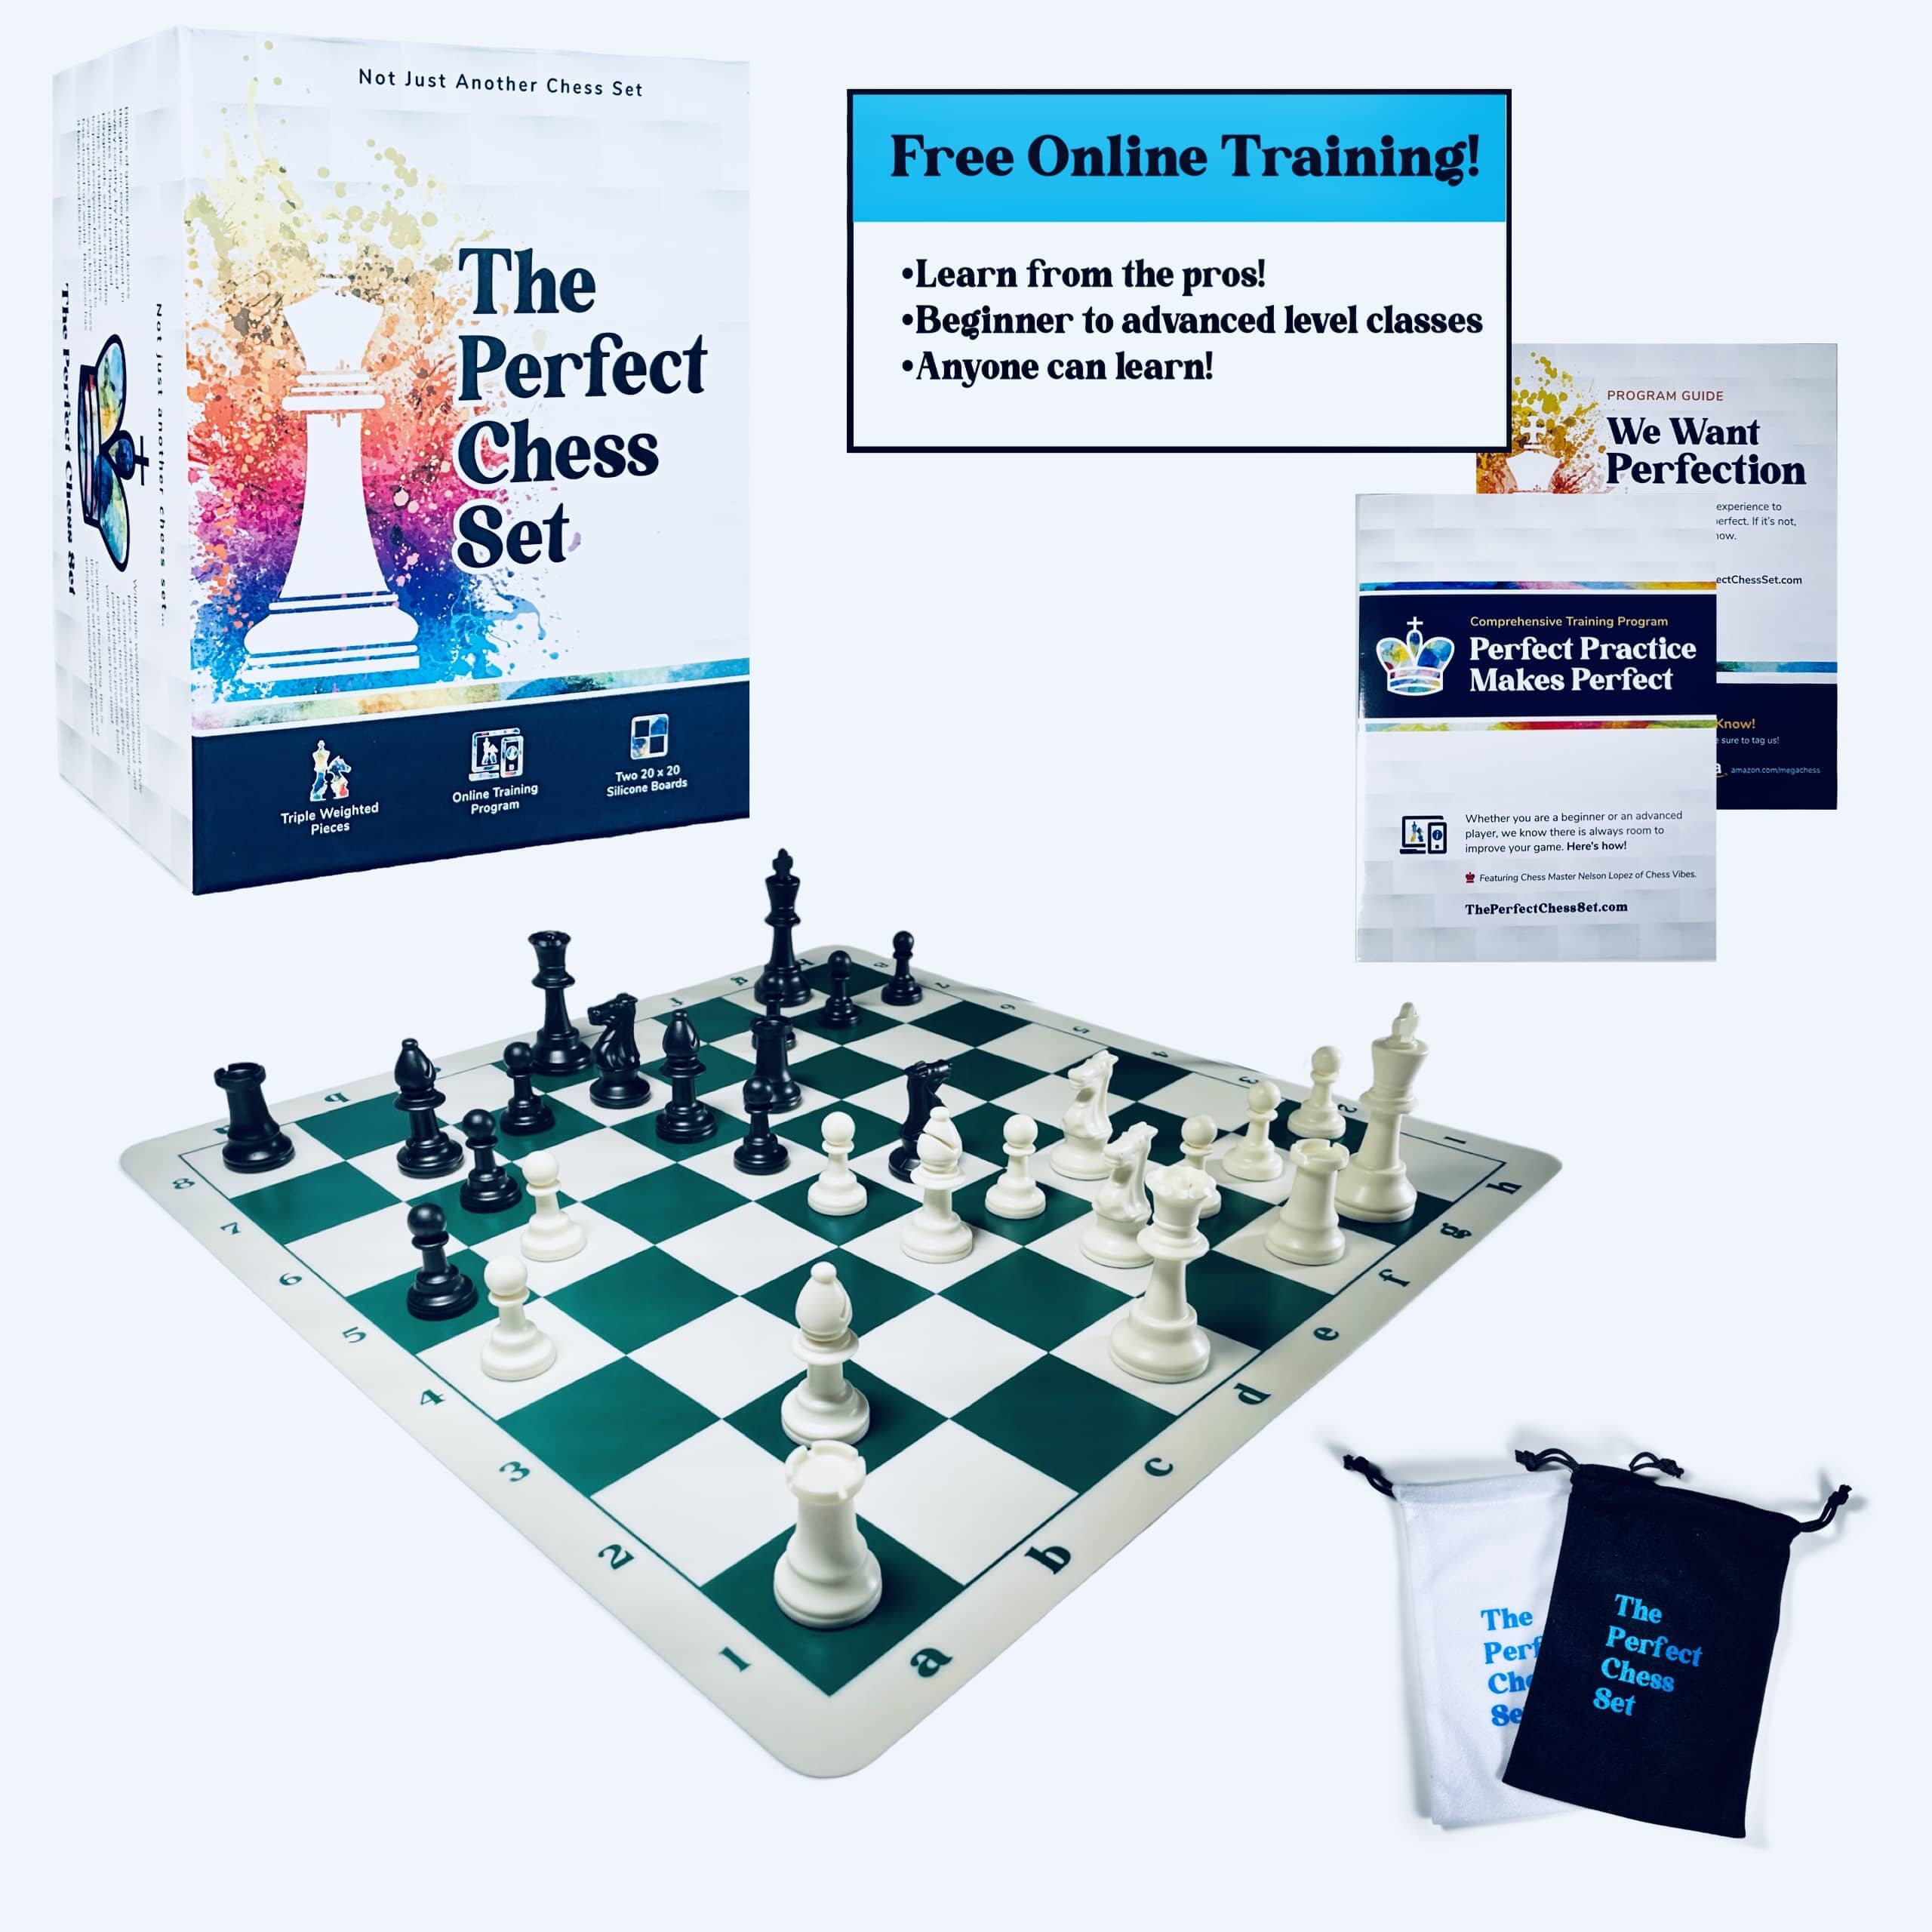 Do chess tutorial from beginners to master level at a very